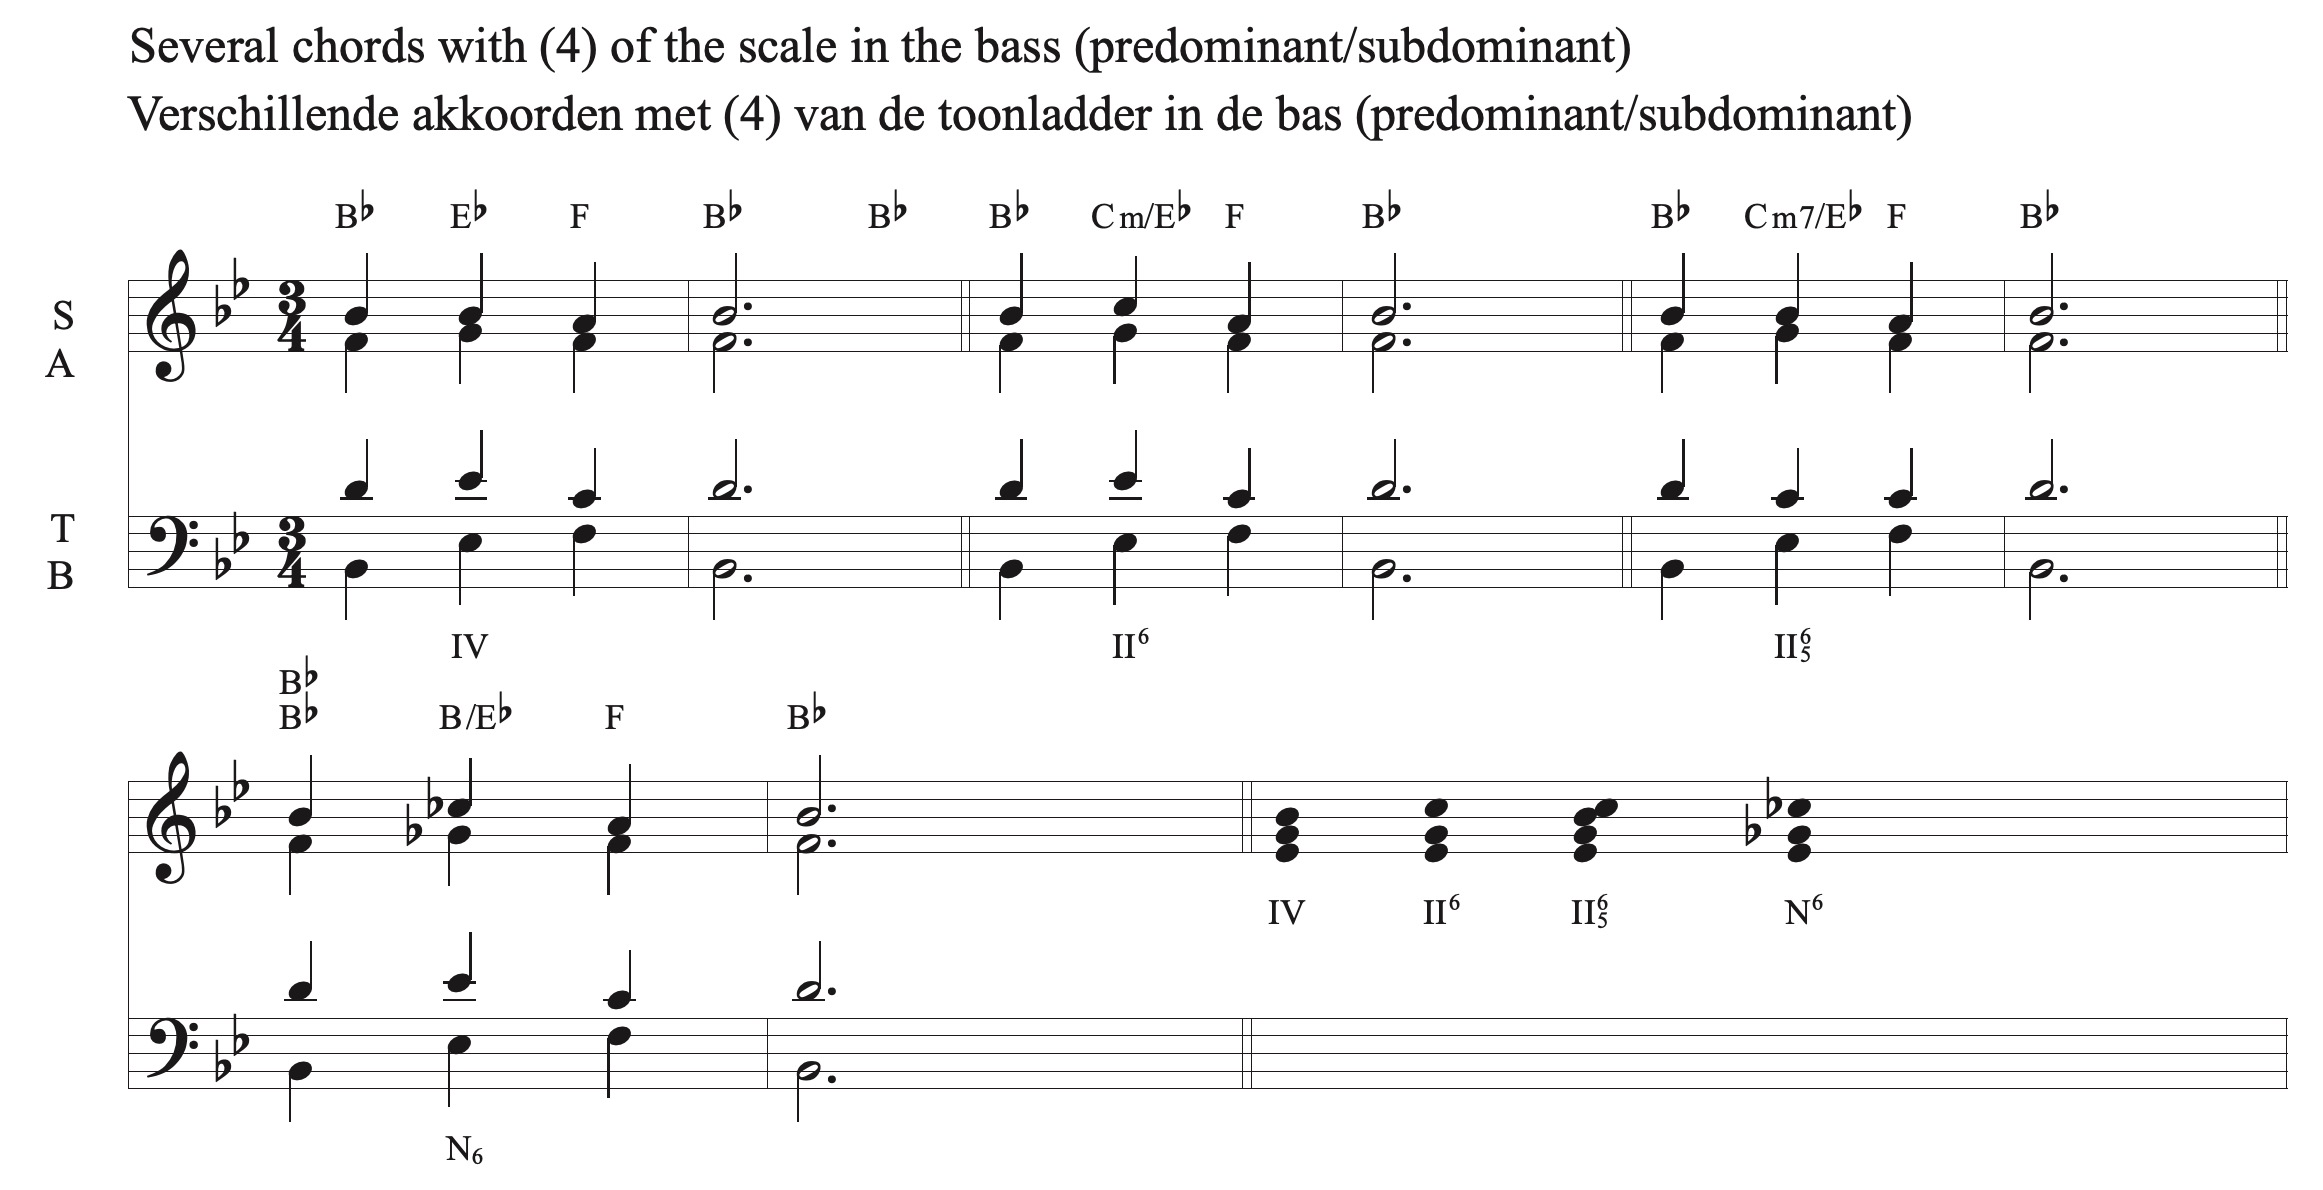 sudominant variants with (4) in the bas MAJOR.jpeg